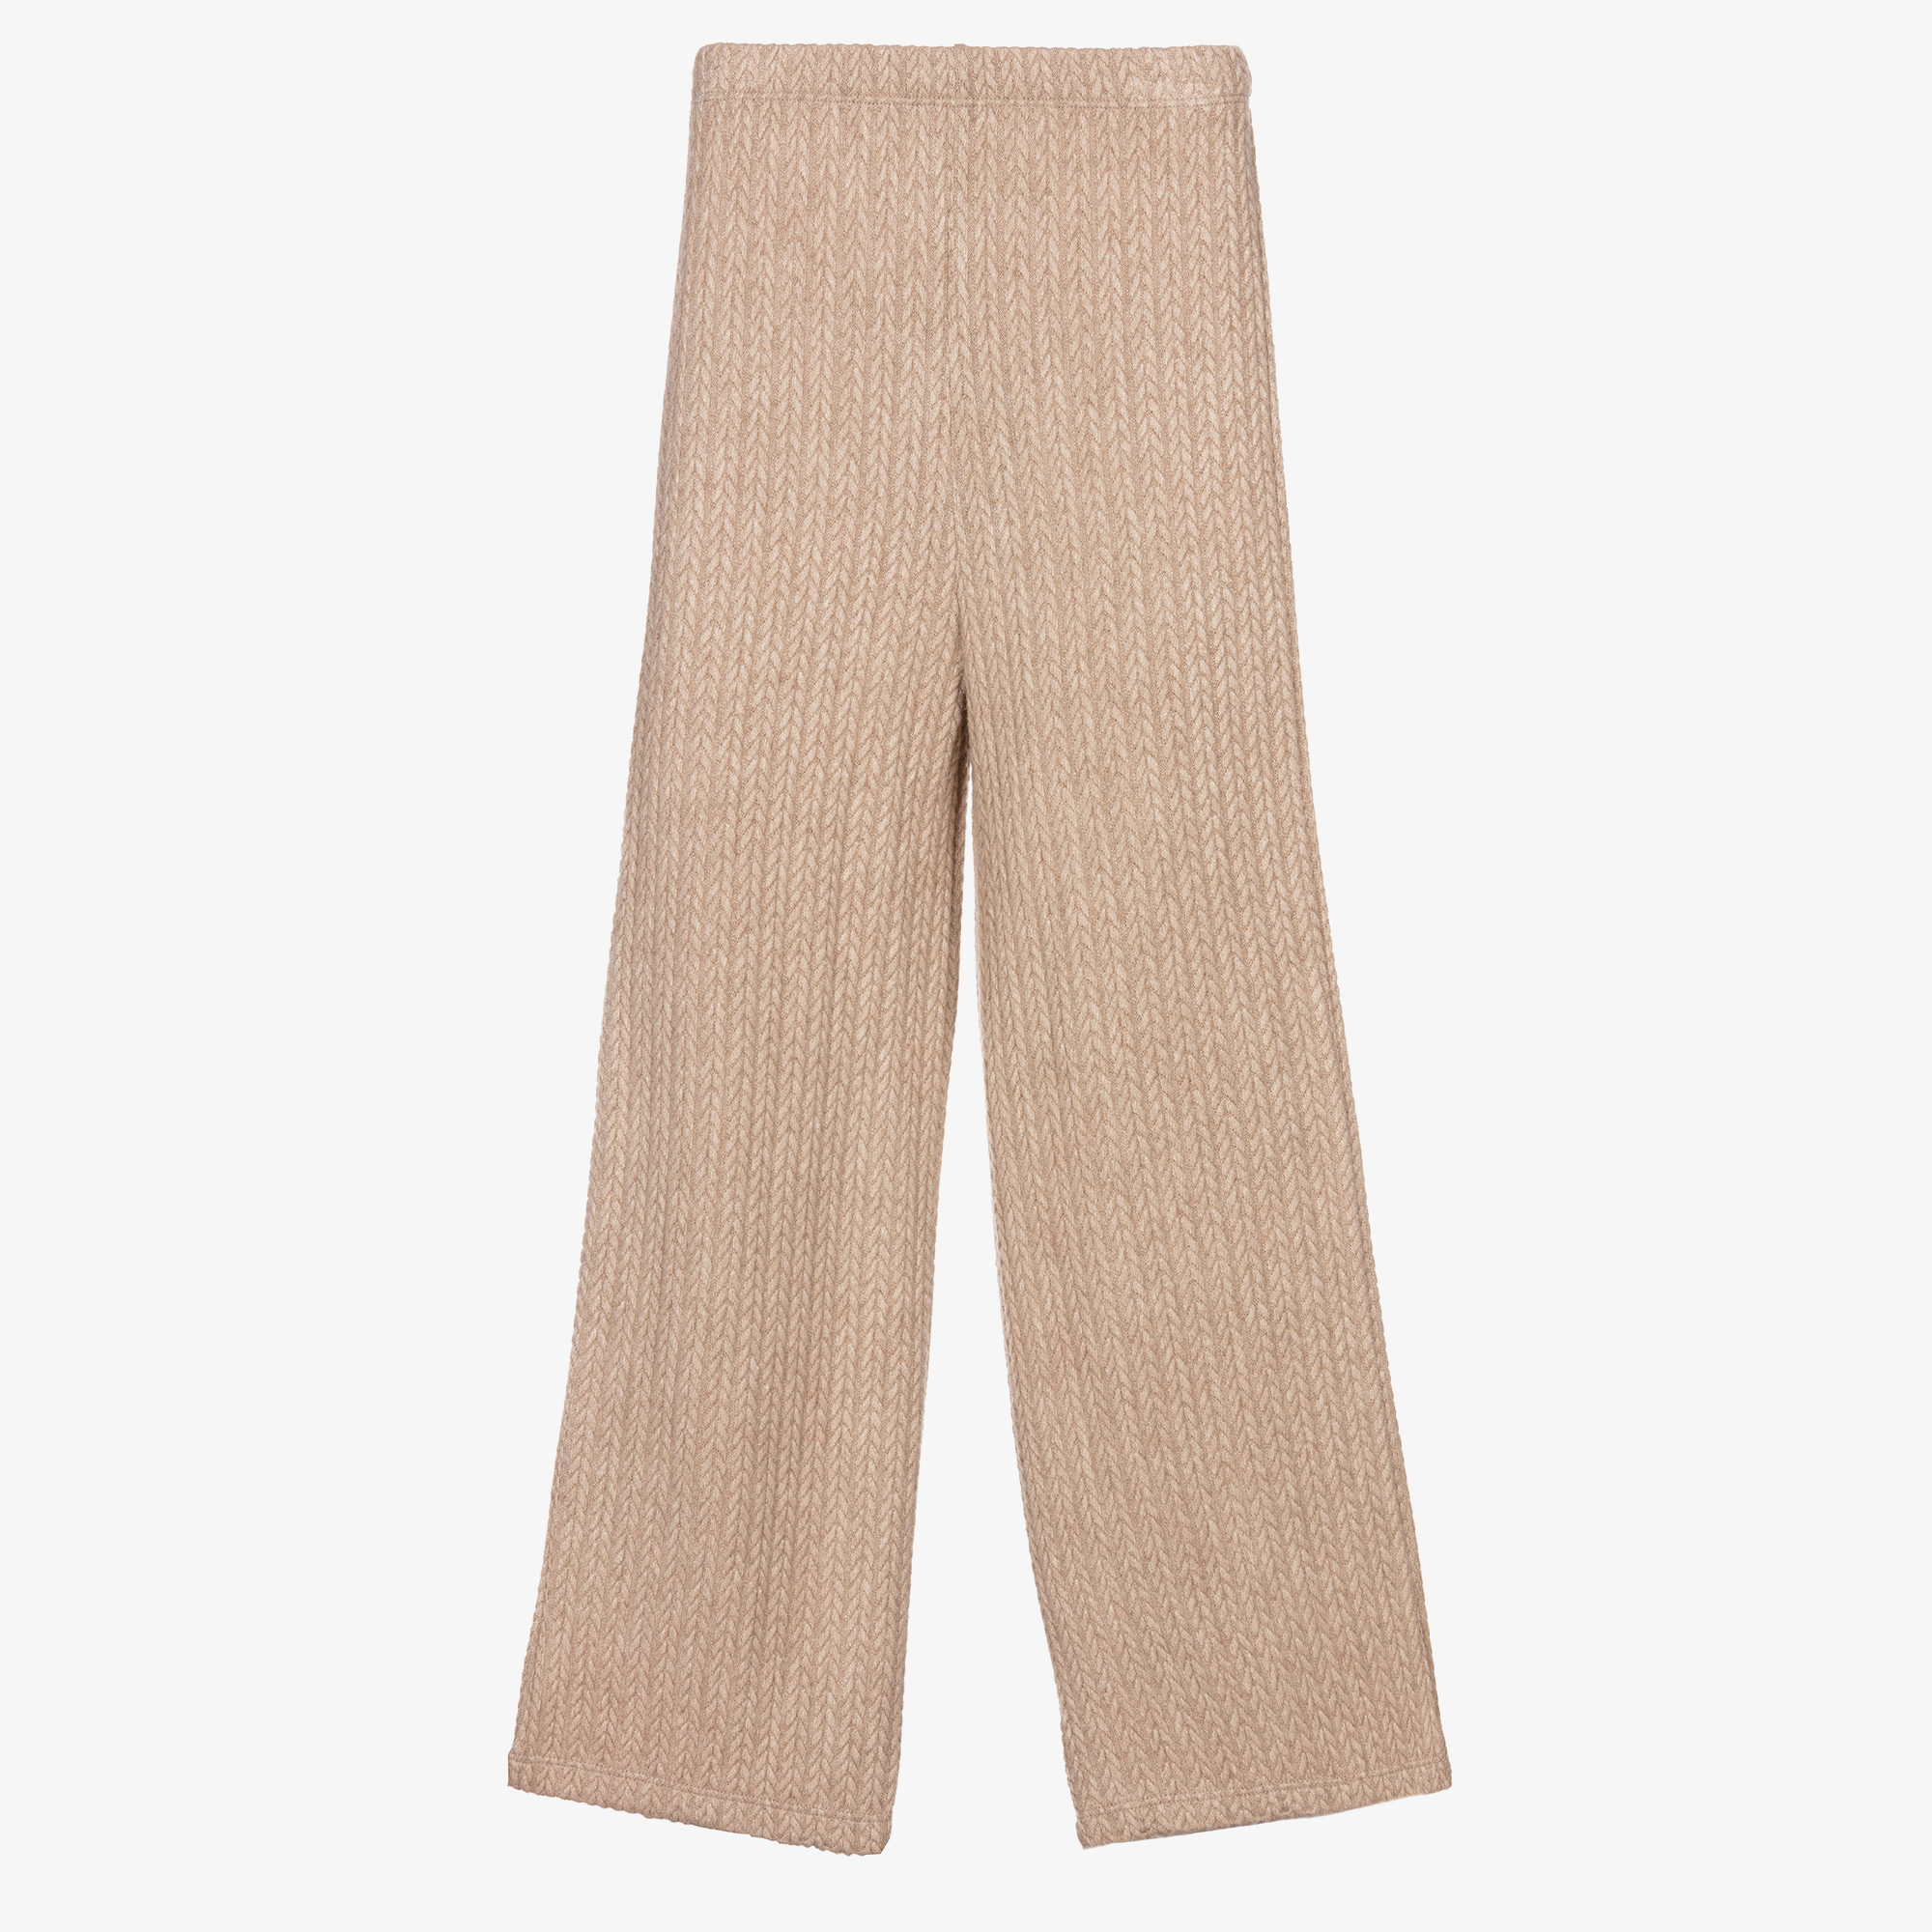 GUESS Knit trousers LISE in camel/ taupe